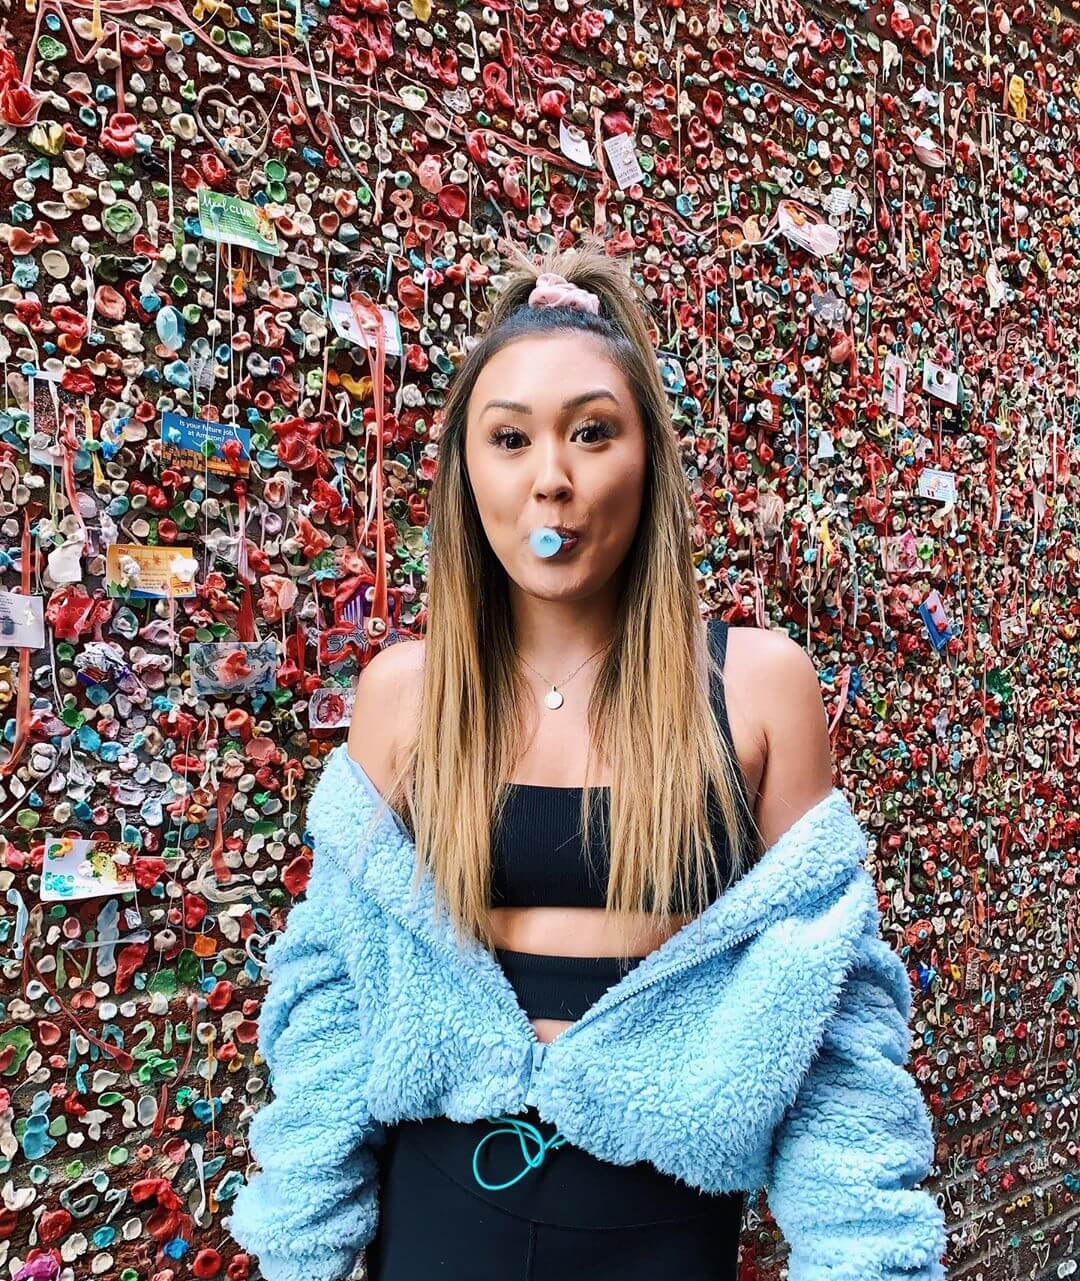 51 Sexy LaurDIY Boobs Pictures Are Essentially Attractive 27